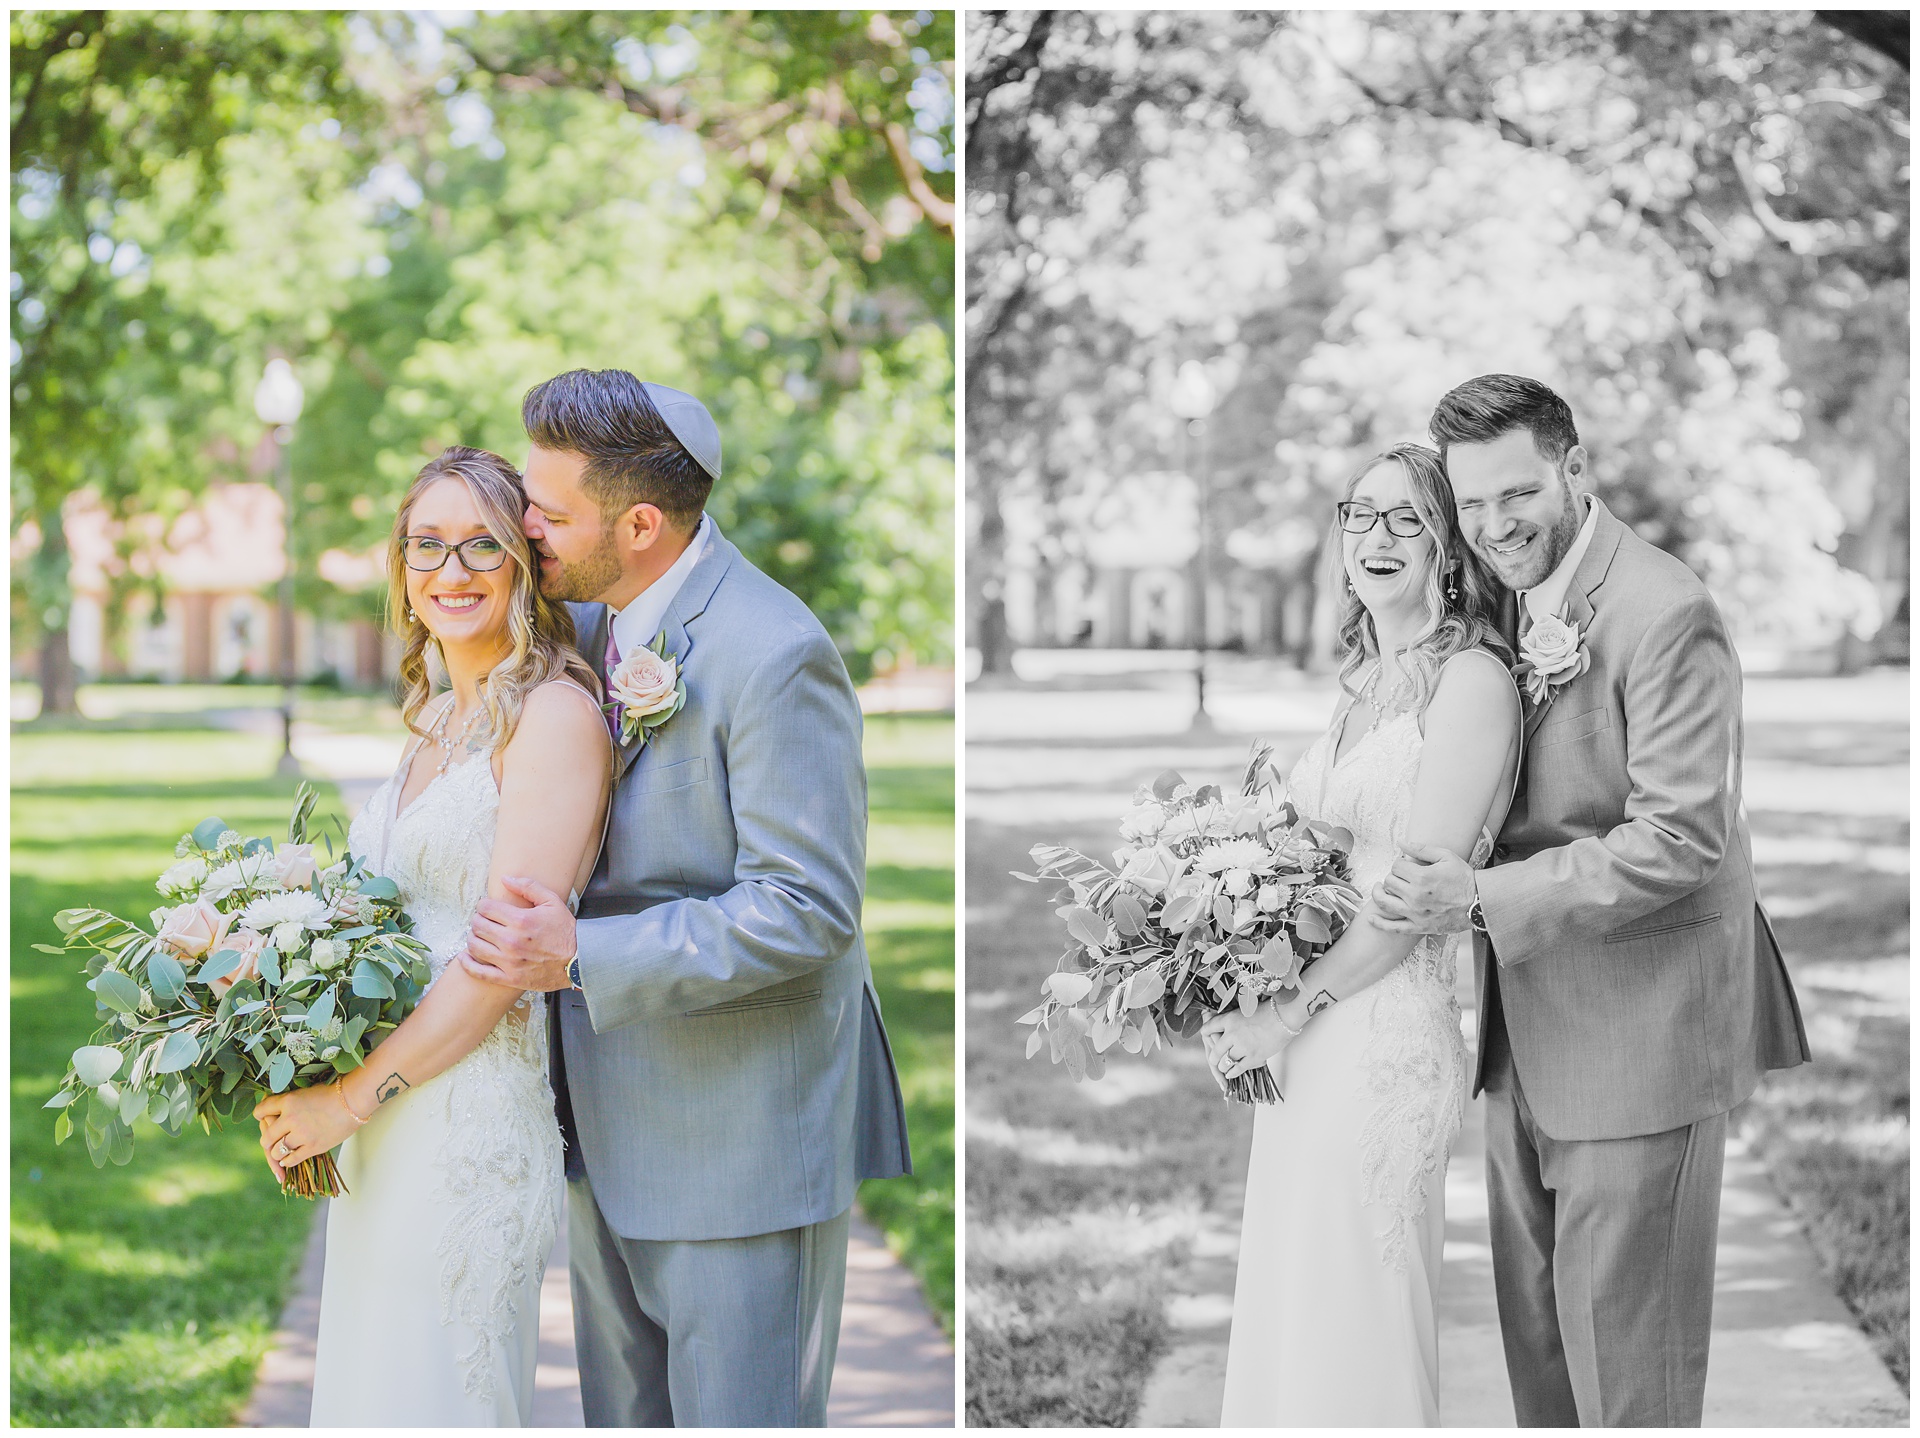 Wedding photography in Lawrence, Kansas, by Kansas City wedding photographers Wisdom-Watson Weddings.